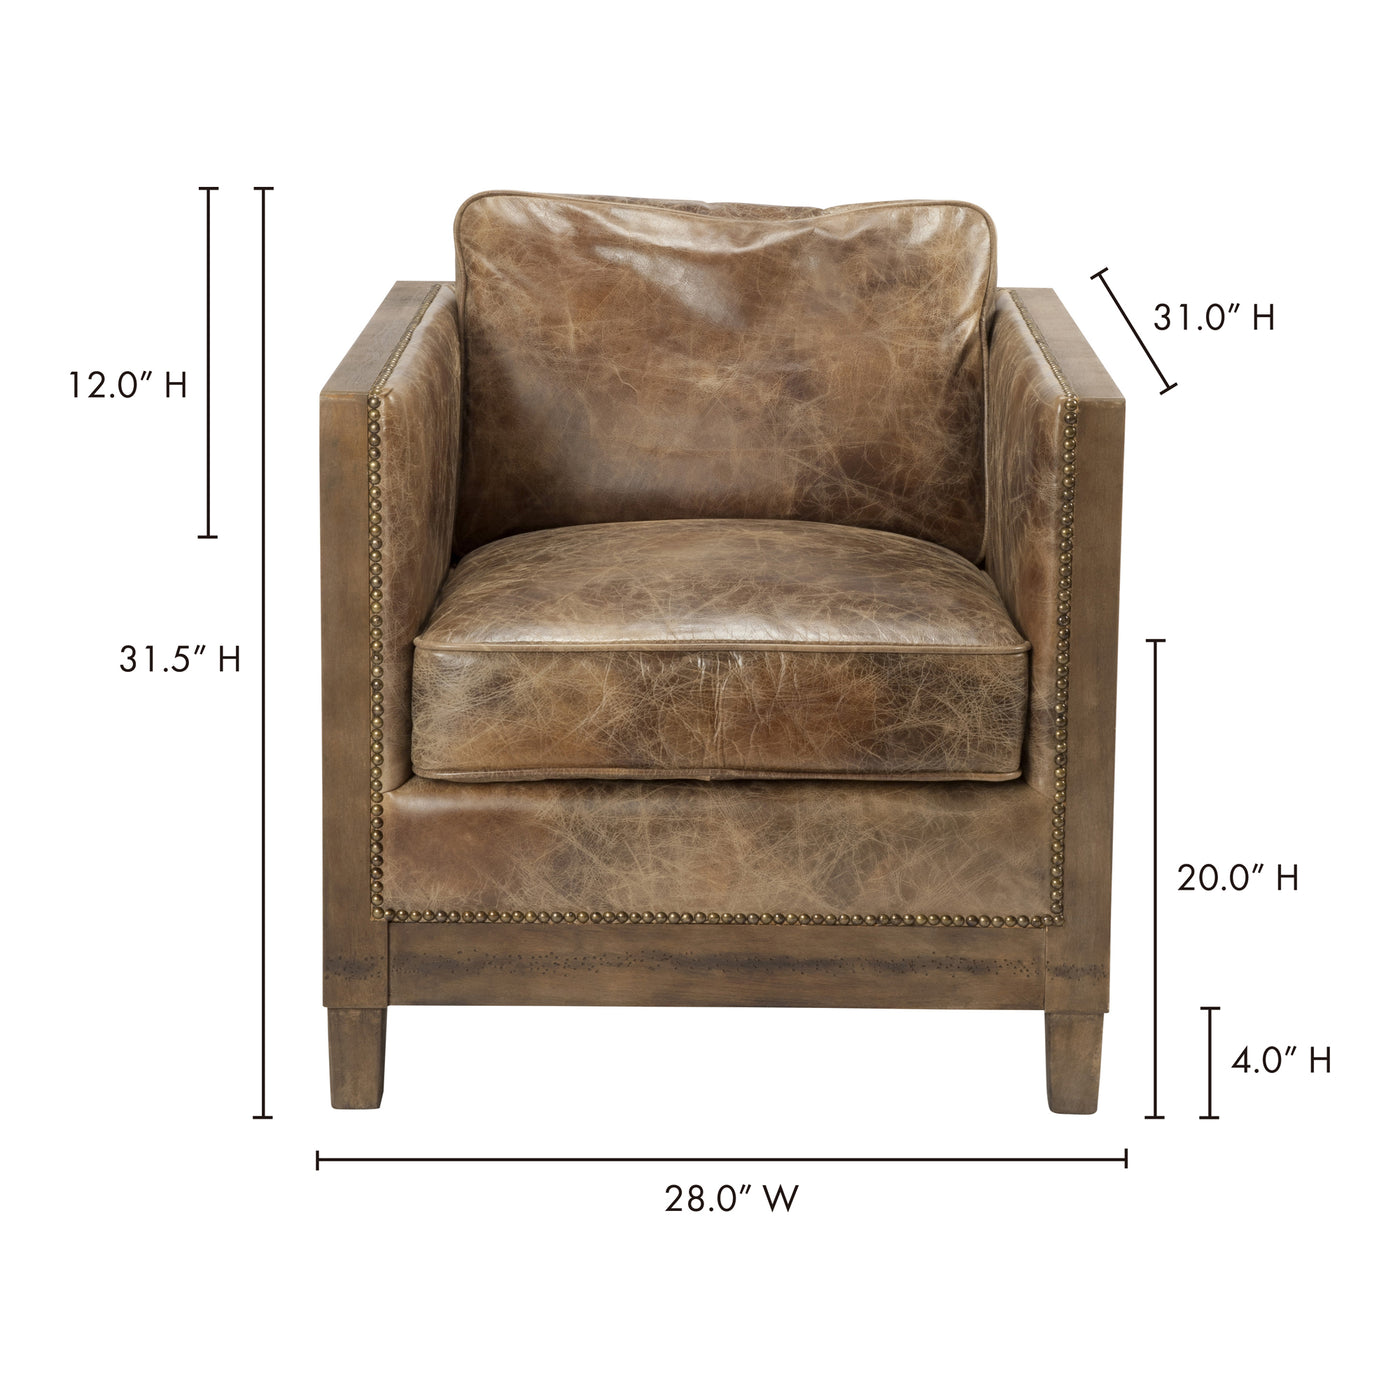 A design entrenched in modernity, the Darlington club chair's rustic roots meet modern industrialism. Warm hues of soft, d...